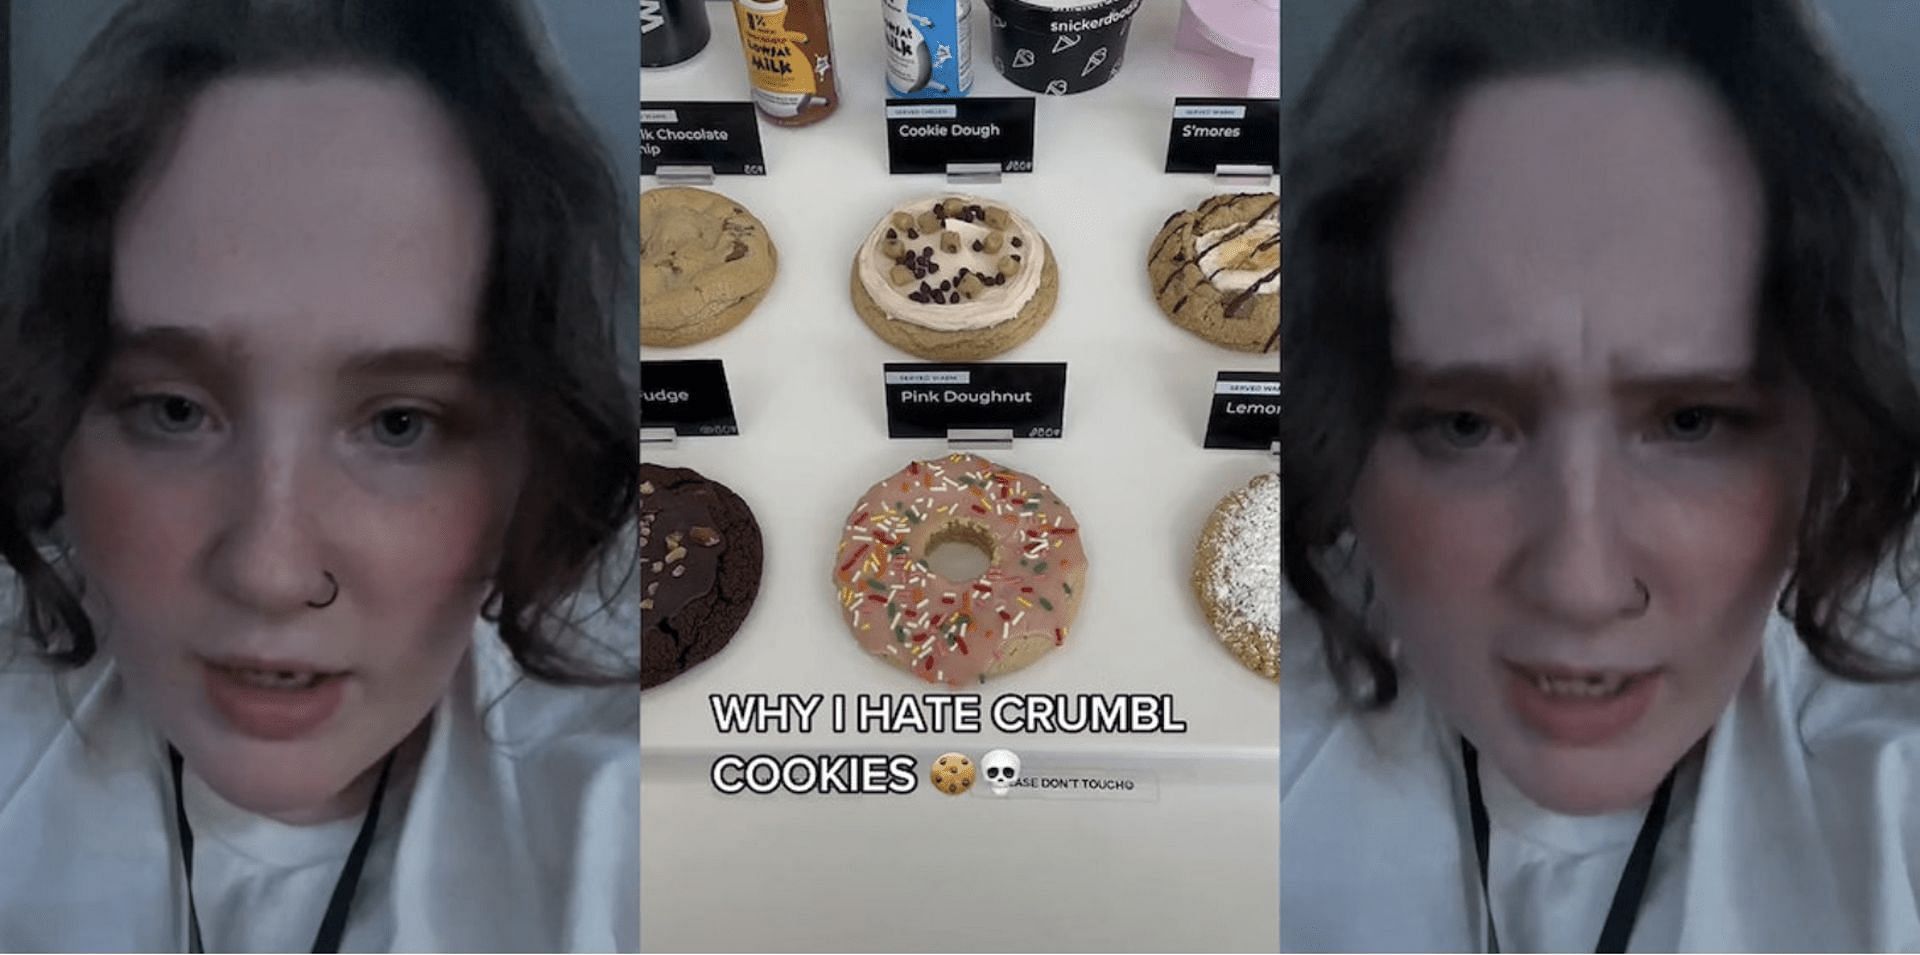 Former Cookie Crumbl employee talks about how the chain exploits the employees. (Image via TikTok)